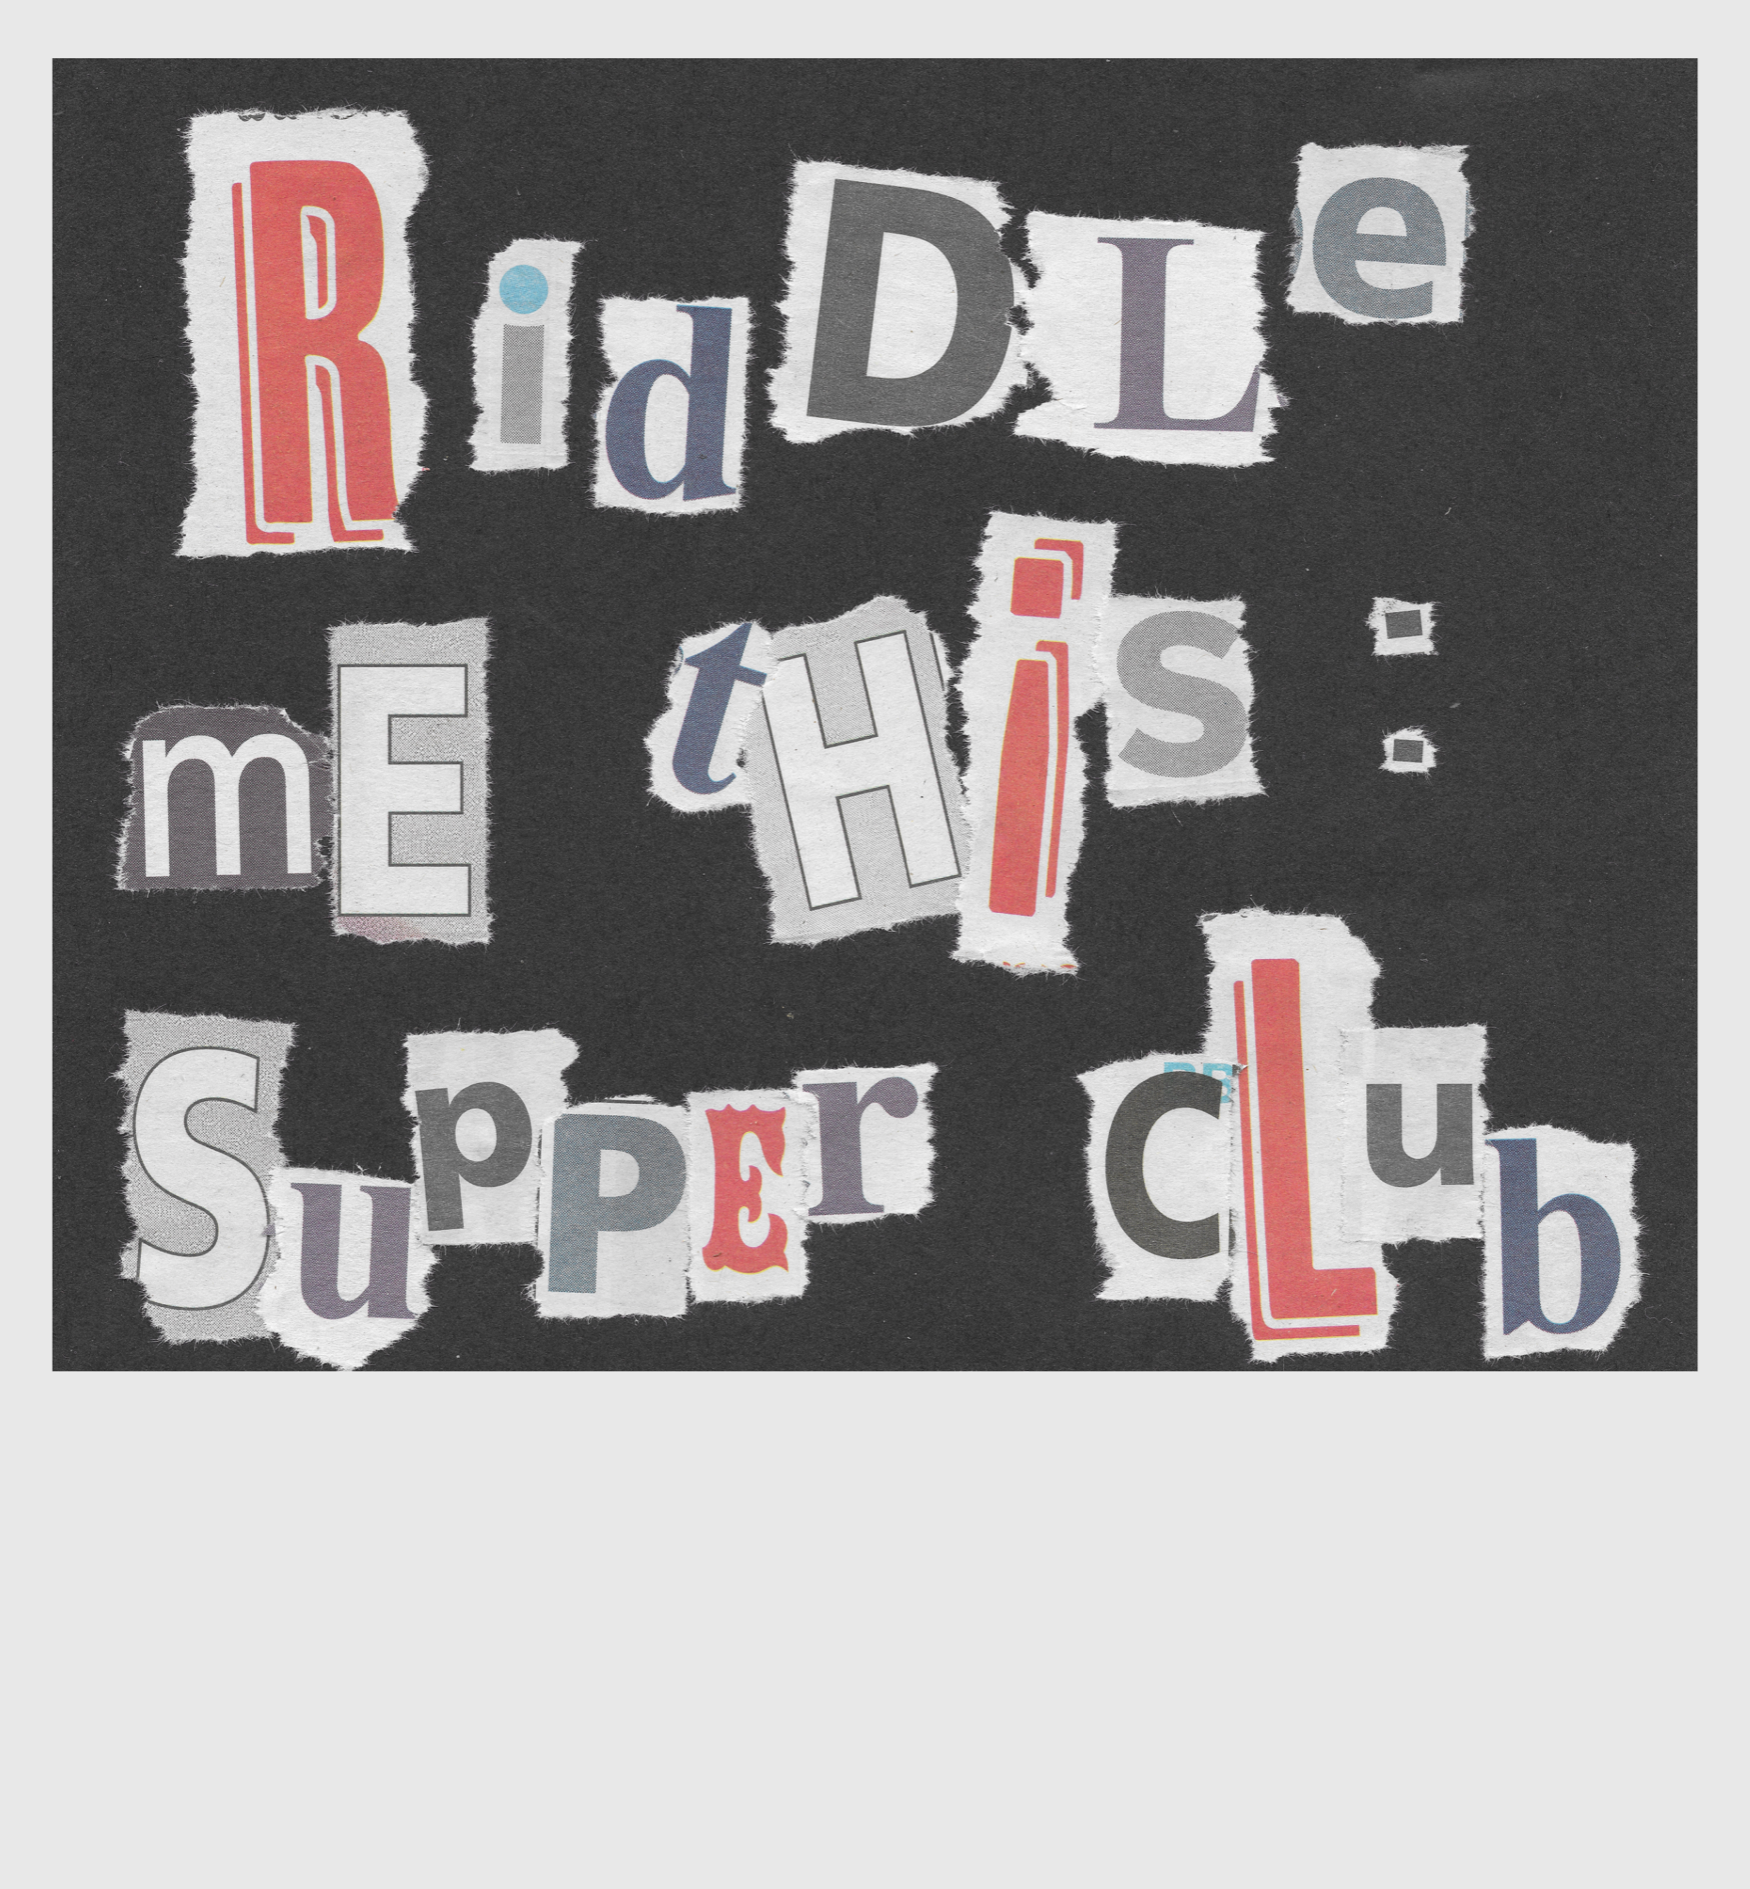 Ripped newspaper cuttings spelling out - Riddle Me This: Supper Club